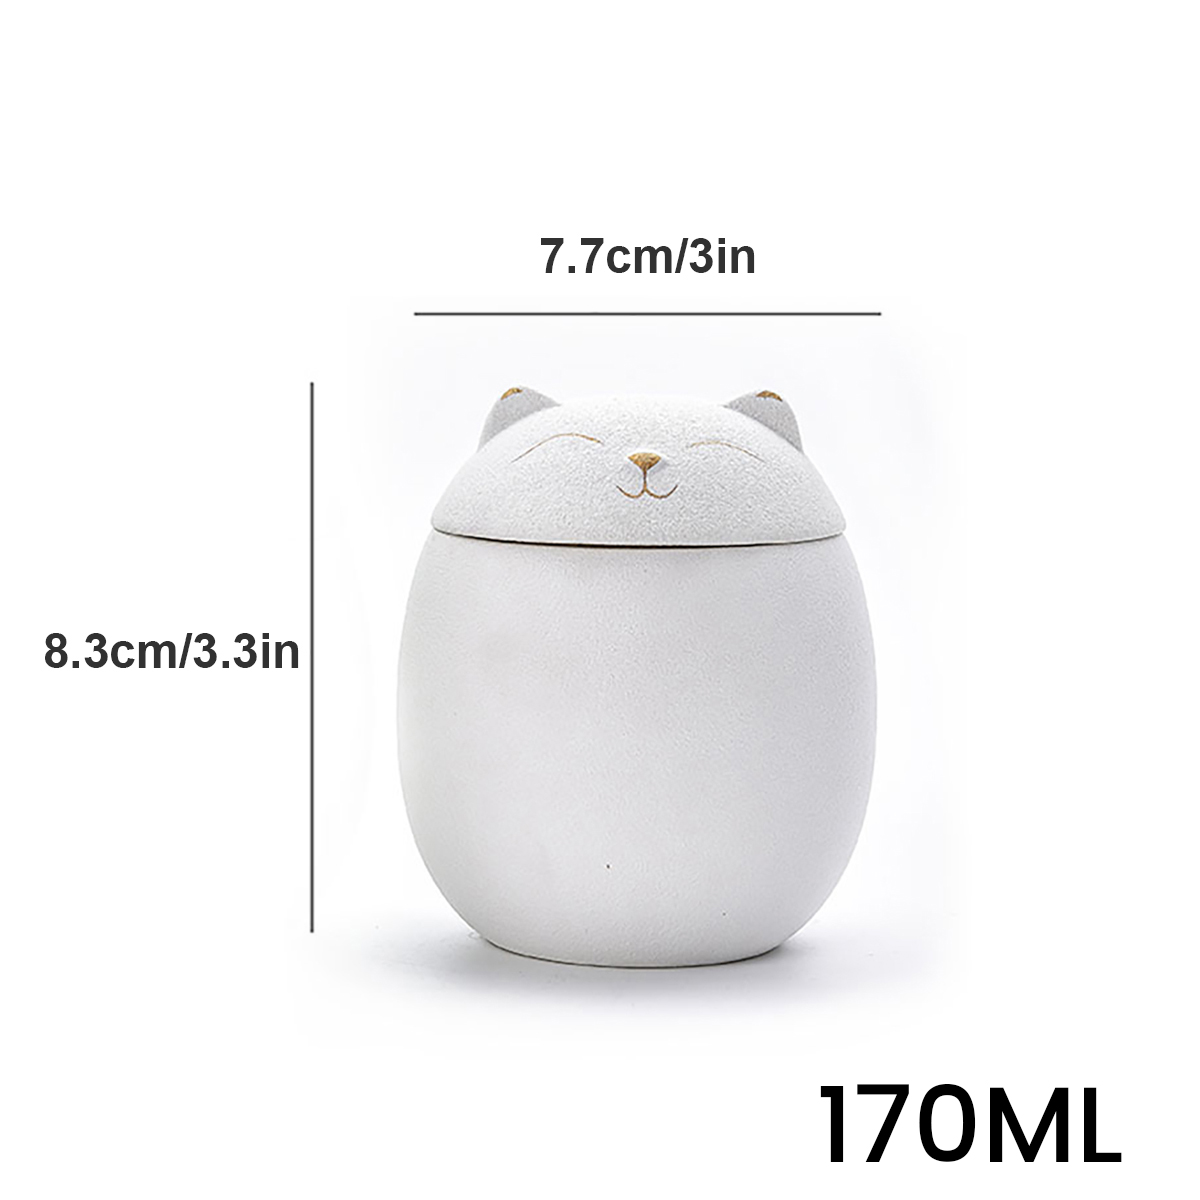 500ml-Urn-for-Pet-Ashes-Cat-Shape-Memorial-Cremation-Urns-Handcrafted-Black-Decorative-Urns-for-Fune-1947529-5